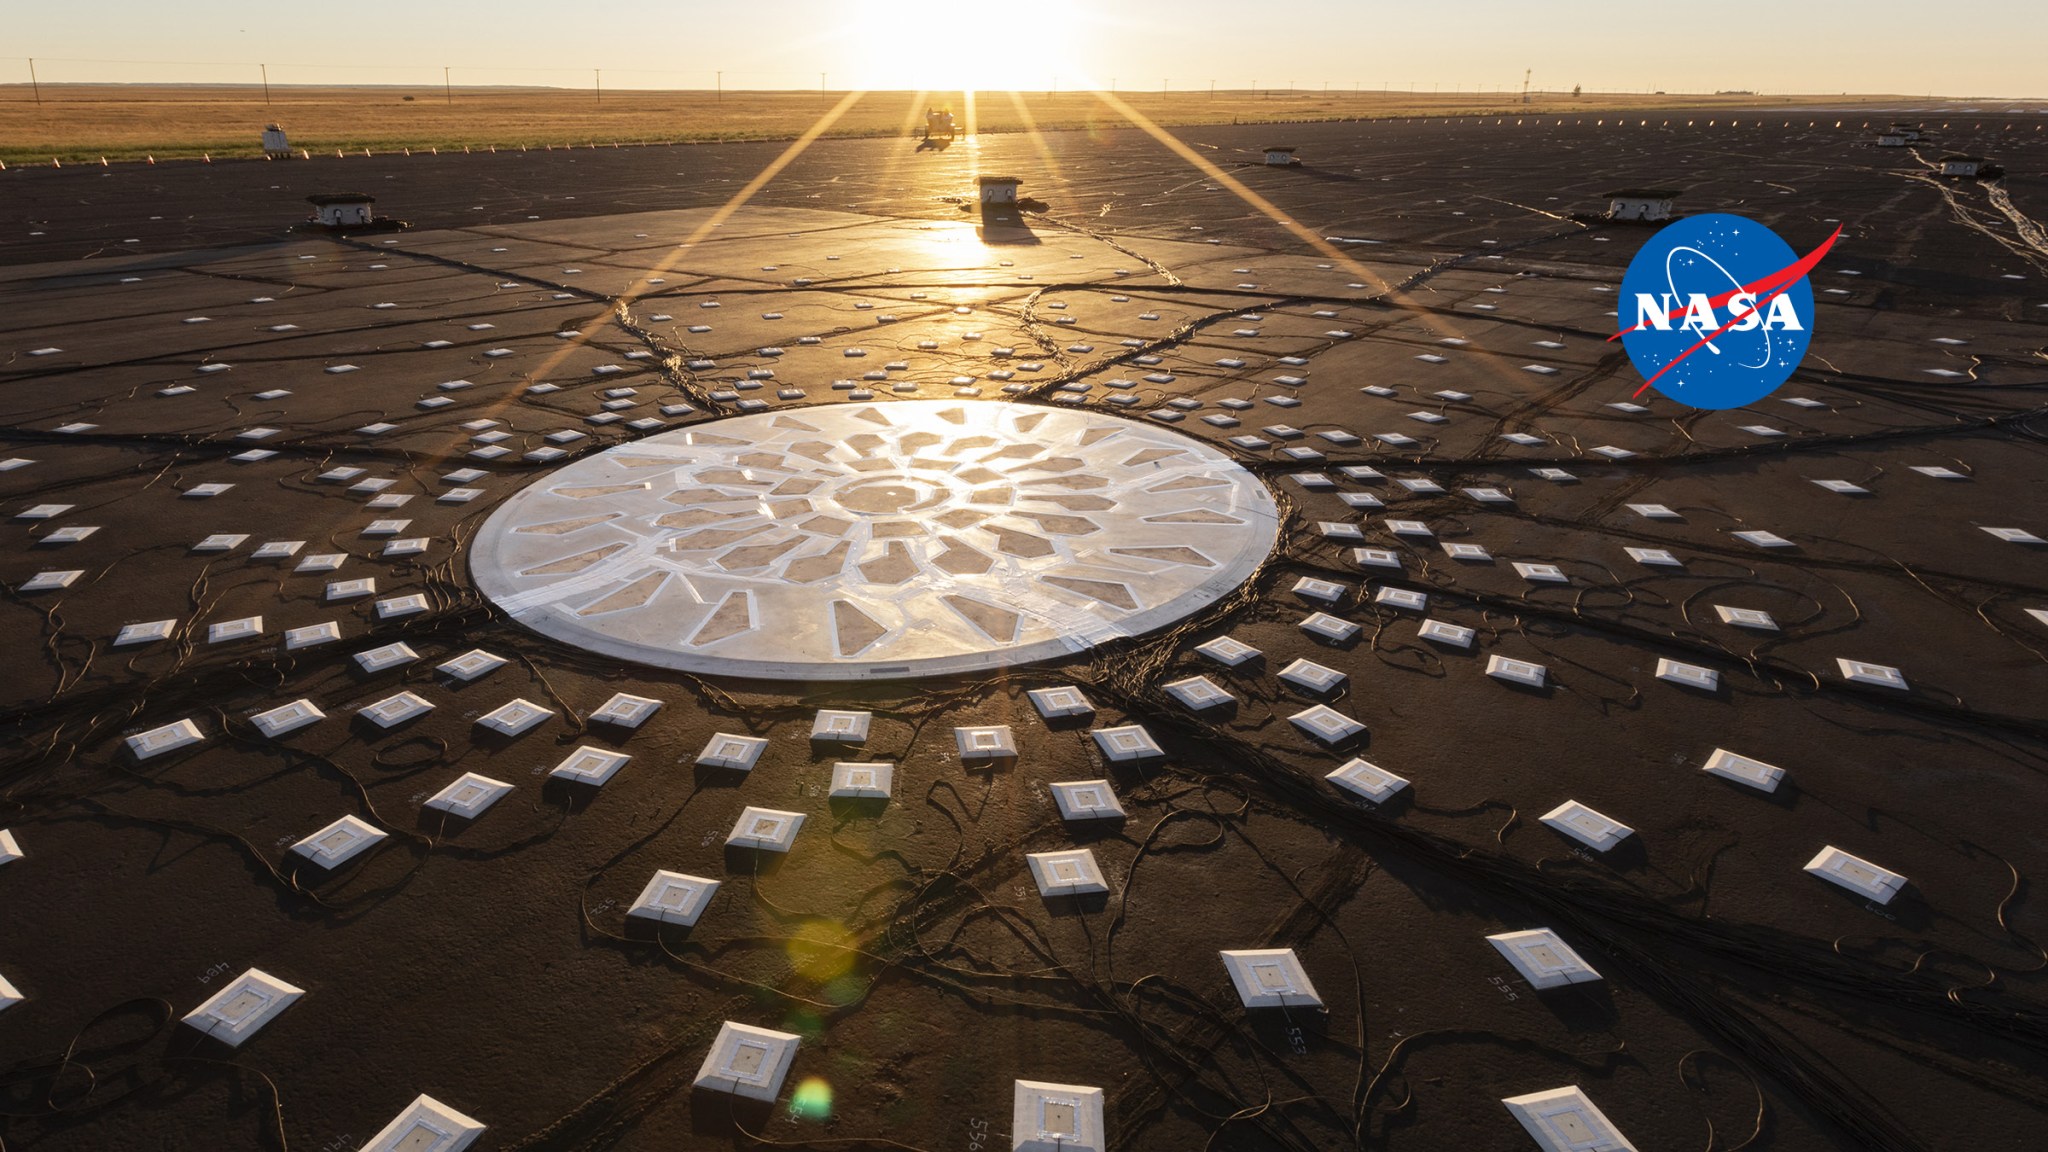 Large white circular solar panel on a black ground surface surrounded by many smaller white square solar panels with sunshine beaming in from the top.